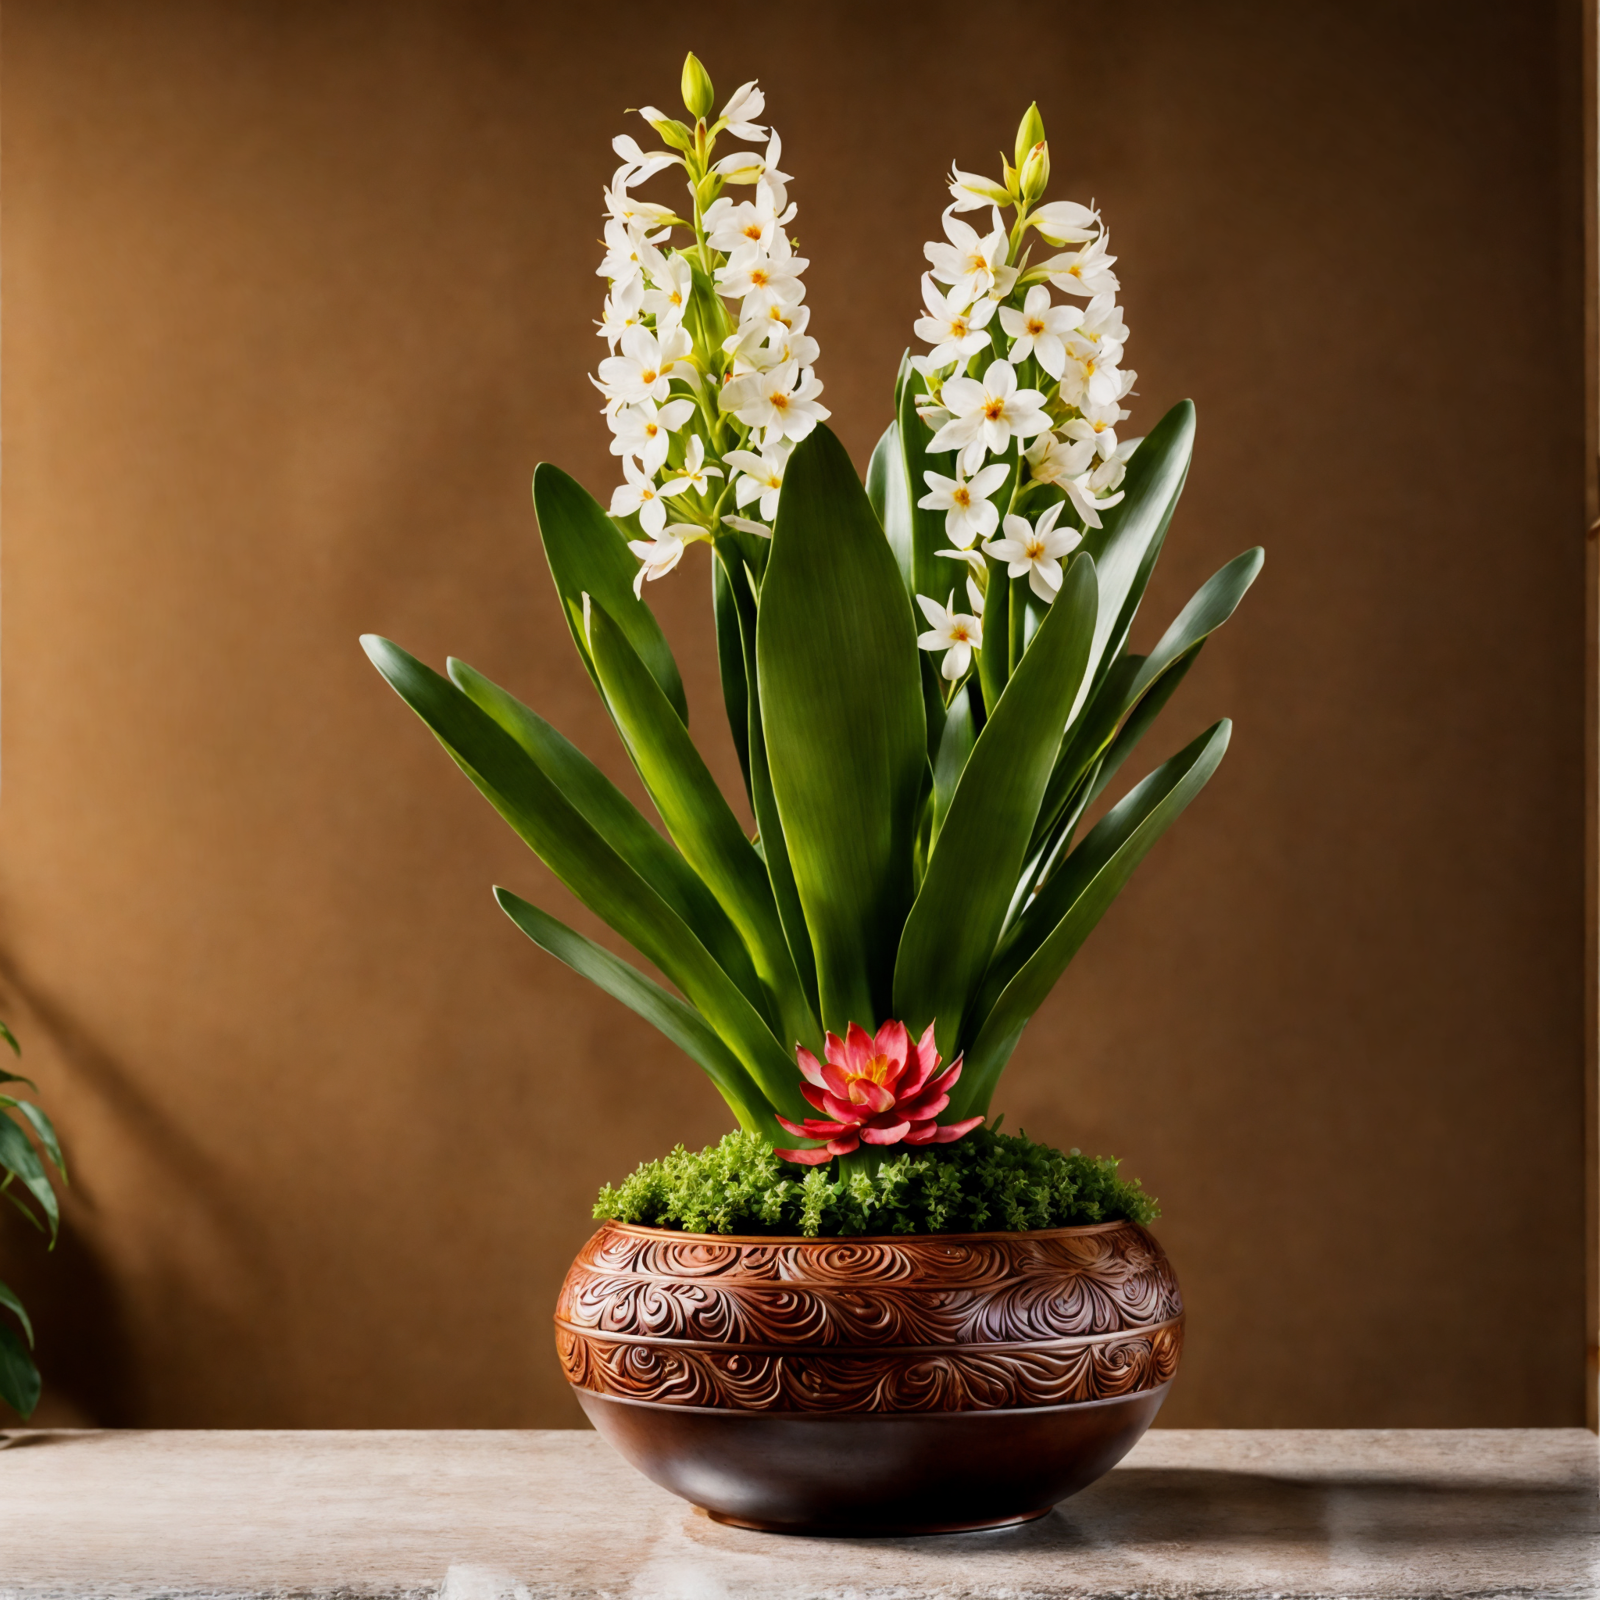 Two Hyacinthus orientalis flowers in a brown bowl on a wooden table, with clear, neutral lighting.